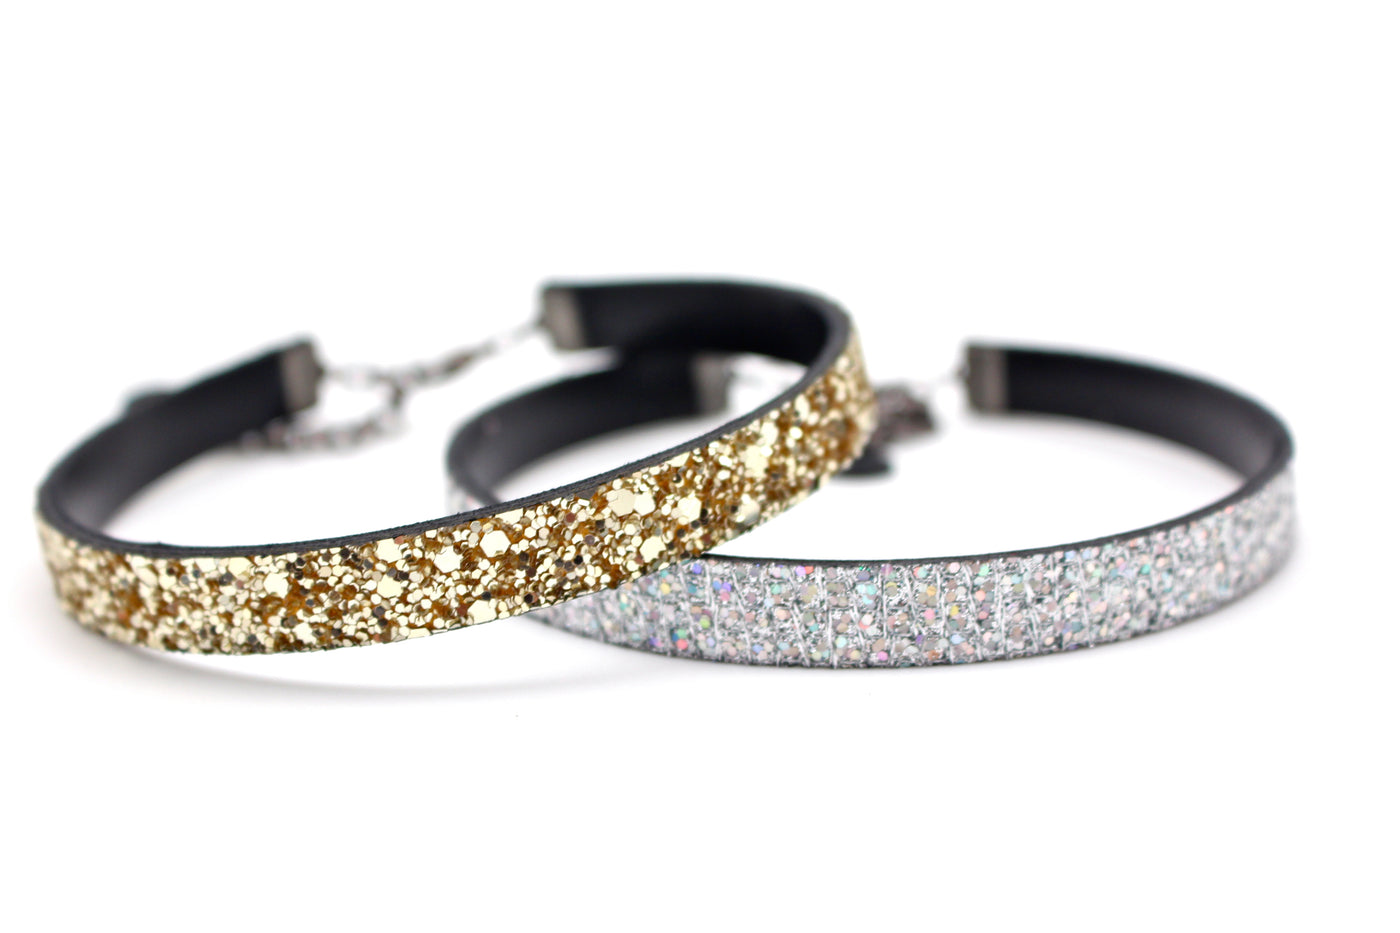 Karli Buxton Glitter Choker - Corinne an Affordable Women's Clothing Boutique in the US USA